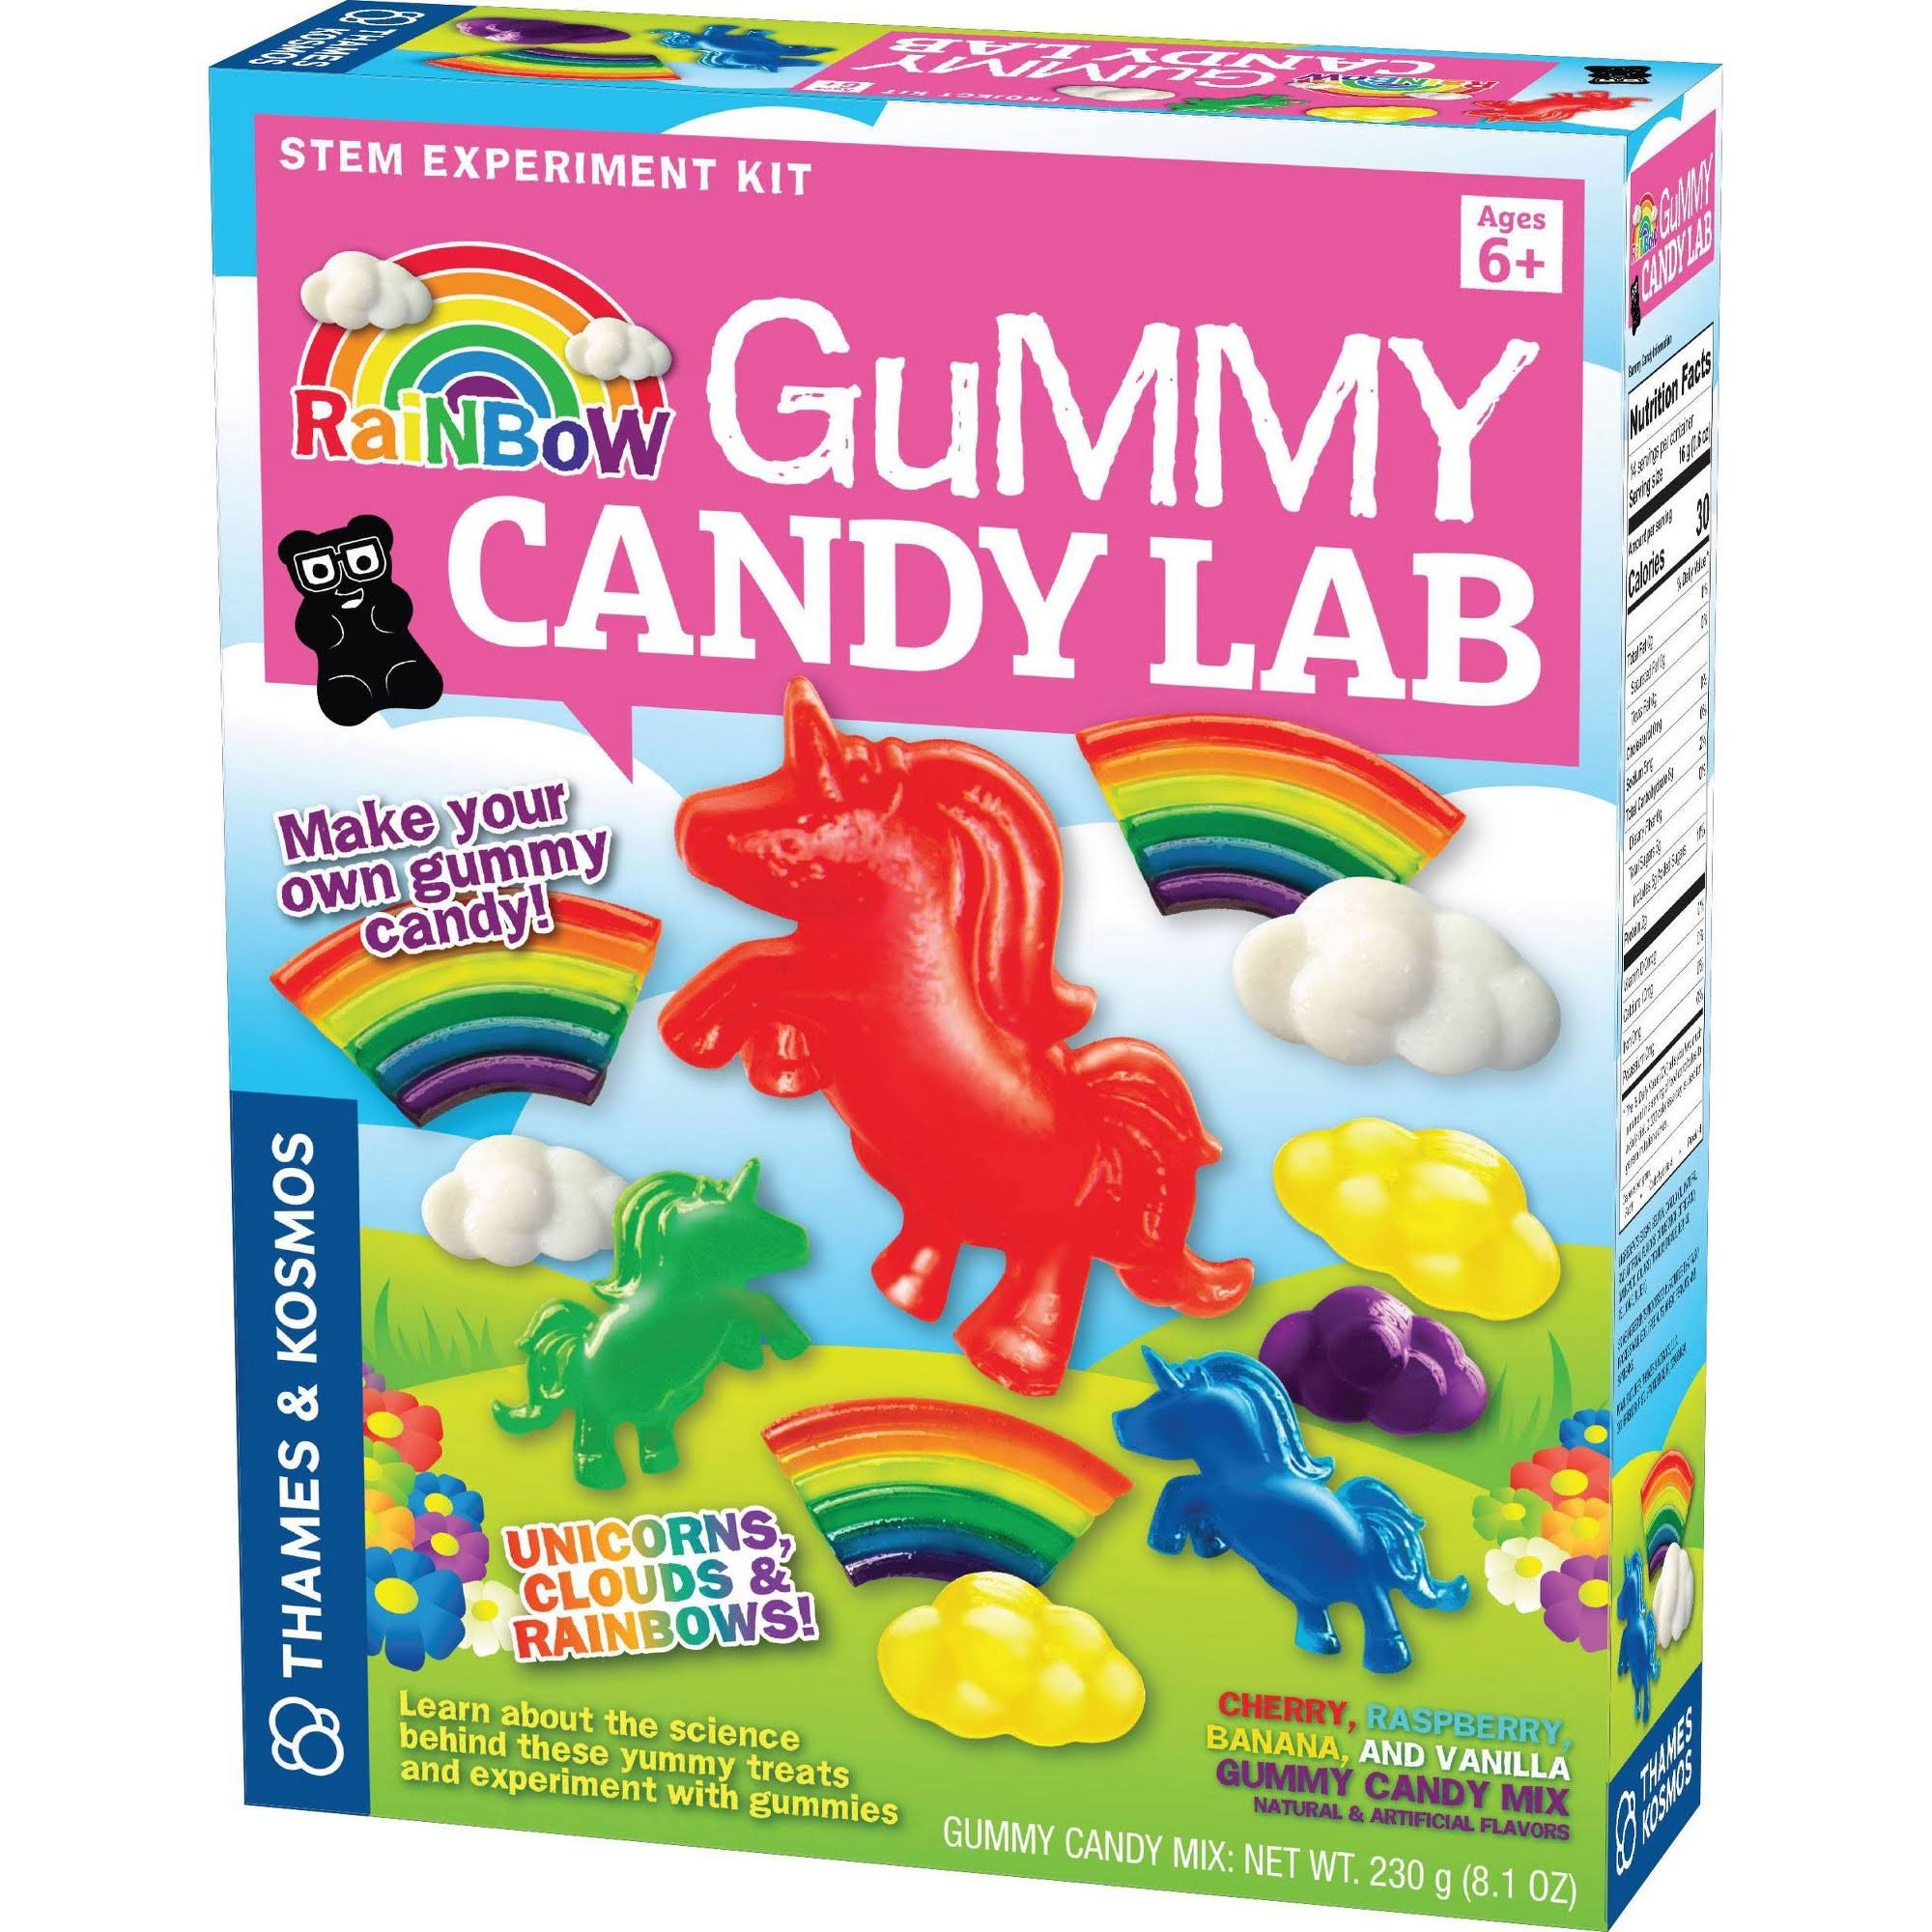 Thames & Kosmos Rainbow Gummy Candy Lab - Unicorns Clouds & Rainbows! Sweet Science Stem Experiment Kit Make Your Own Gummy Candies in Cool Shapes